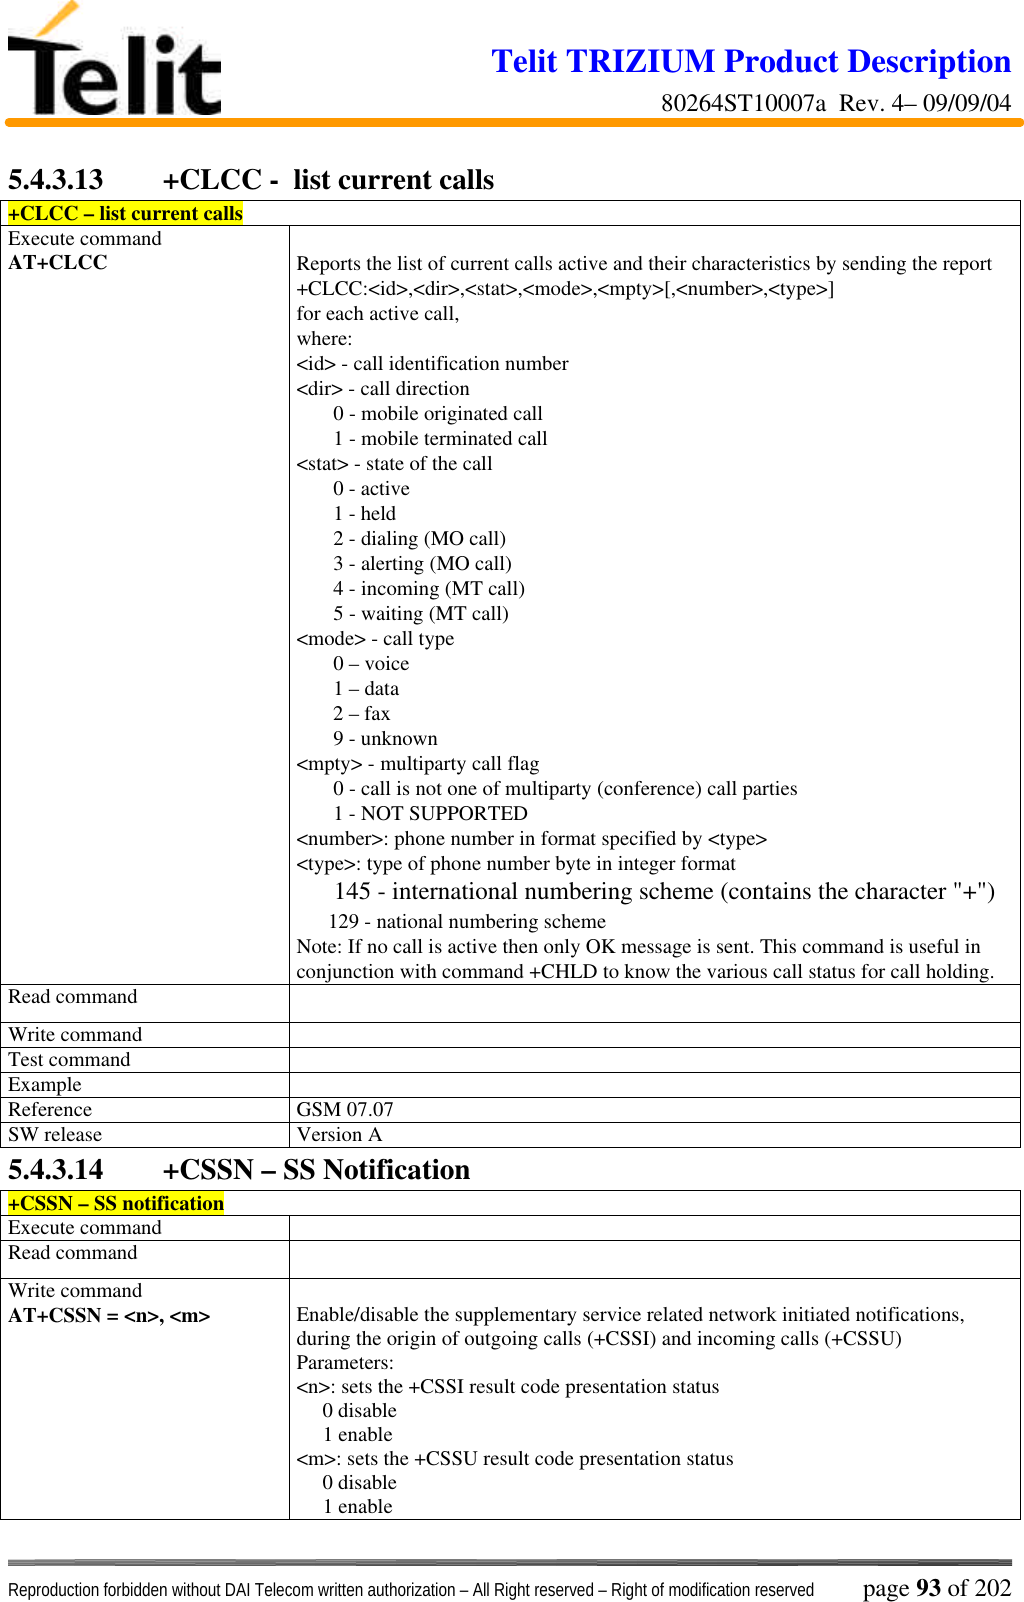 Telit TRIZIUM Product Description80264ST10007a  Rev. 4– 09/09/04Reproduction forbidden without DAI Telecom written authorization – All Right reserved – Right of modification reserved page 93 of 2025.4.3.13  +CLCC -  list current calls+CLCC – list current callsExecute commandAT+CLCC Reports the list of current calls active and their characteristics by sending the report+CLCC:&lt;id&gt;,&lt;dir&gt;,&lt;stat&gt;,&lt;mode&gt;,&lt;mpty&gt;[,&lt;number&gt;,&lt;type&gt;]for each active call,where:&lt;id&gt; - call identification number&lt;dir&gt; - call direction       0 - mobile originated call       1 - mobile terminated call&lt;stat&gt; - state of the call       0 - active       1 - held       2 - dialing (MO call)       3 - alerting (MO call)       4 - incoming (MT call)       5 - waiting (MT call)&lt;mode&gt; - call type       0 – voice       1 – data       2 – fax       9 - unknown&lt;mpty&gt; - multiparty call flag       0 - call is not one of multiparty (conference) call parties       1 - NOT SUPPORTED&lt;number&gt;: phone number in format specified by &lt;type&gt;&lt;type&gt;: type of phone number byte in integer format     145 - international numbering scheme (contains the character &quot;+&quot;)      129 - national numbering schemeNote: If no call is active then only OK message is sent. This command is useful inconjunction with command +CHLD to know the various call status for call holding.Read commandWrite commandTest commandExampleReference GSM 07.07SW release Version A5.4.3.14  +CSSN – SS Notification+CSSN – SS notificationExecute commandRead commandWrite commandAT+CSSN = &lt;n&gt;, &lt;m&gt; Enable/disable the supplementary service related network initiated notifications,during the origin of outgoing calls (+CSSI) and incoming calls (+CSSU)Parameters:&lt;n&gt;: sets the +CSSI result code presentation status     0 disable     1 enable&lt;m&gt;: sets the +CSSU result code presentation status     0 disable     1 enable